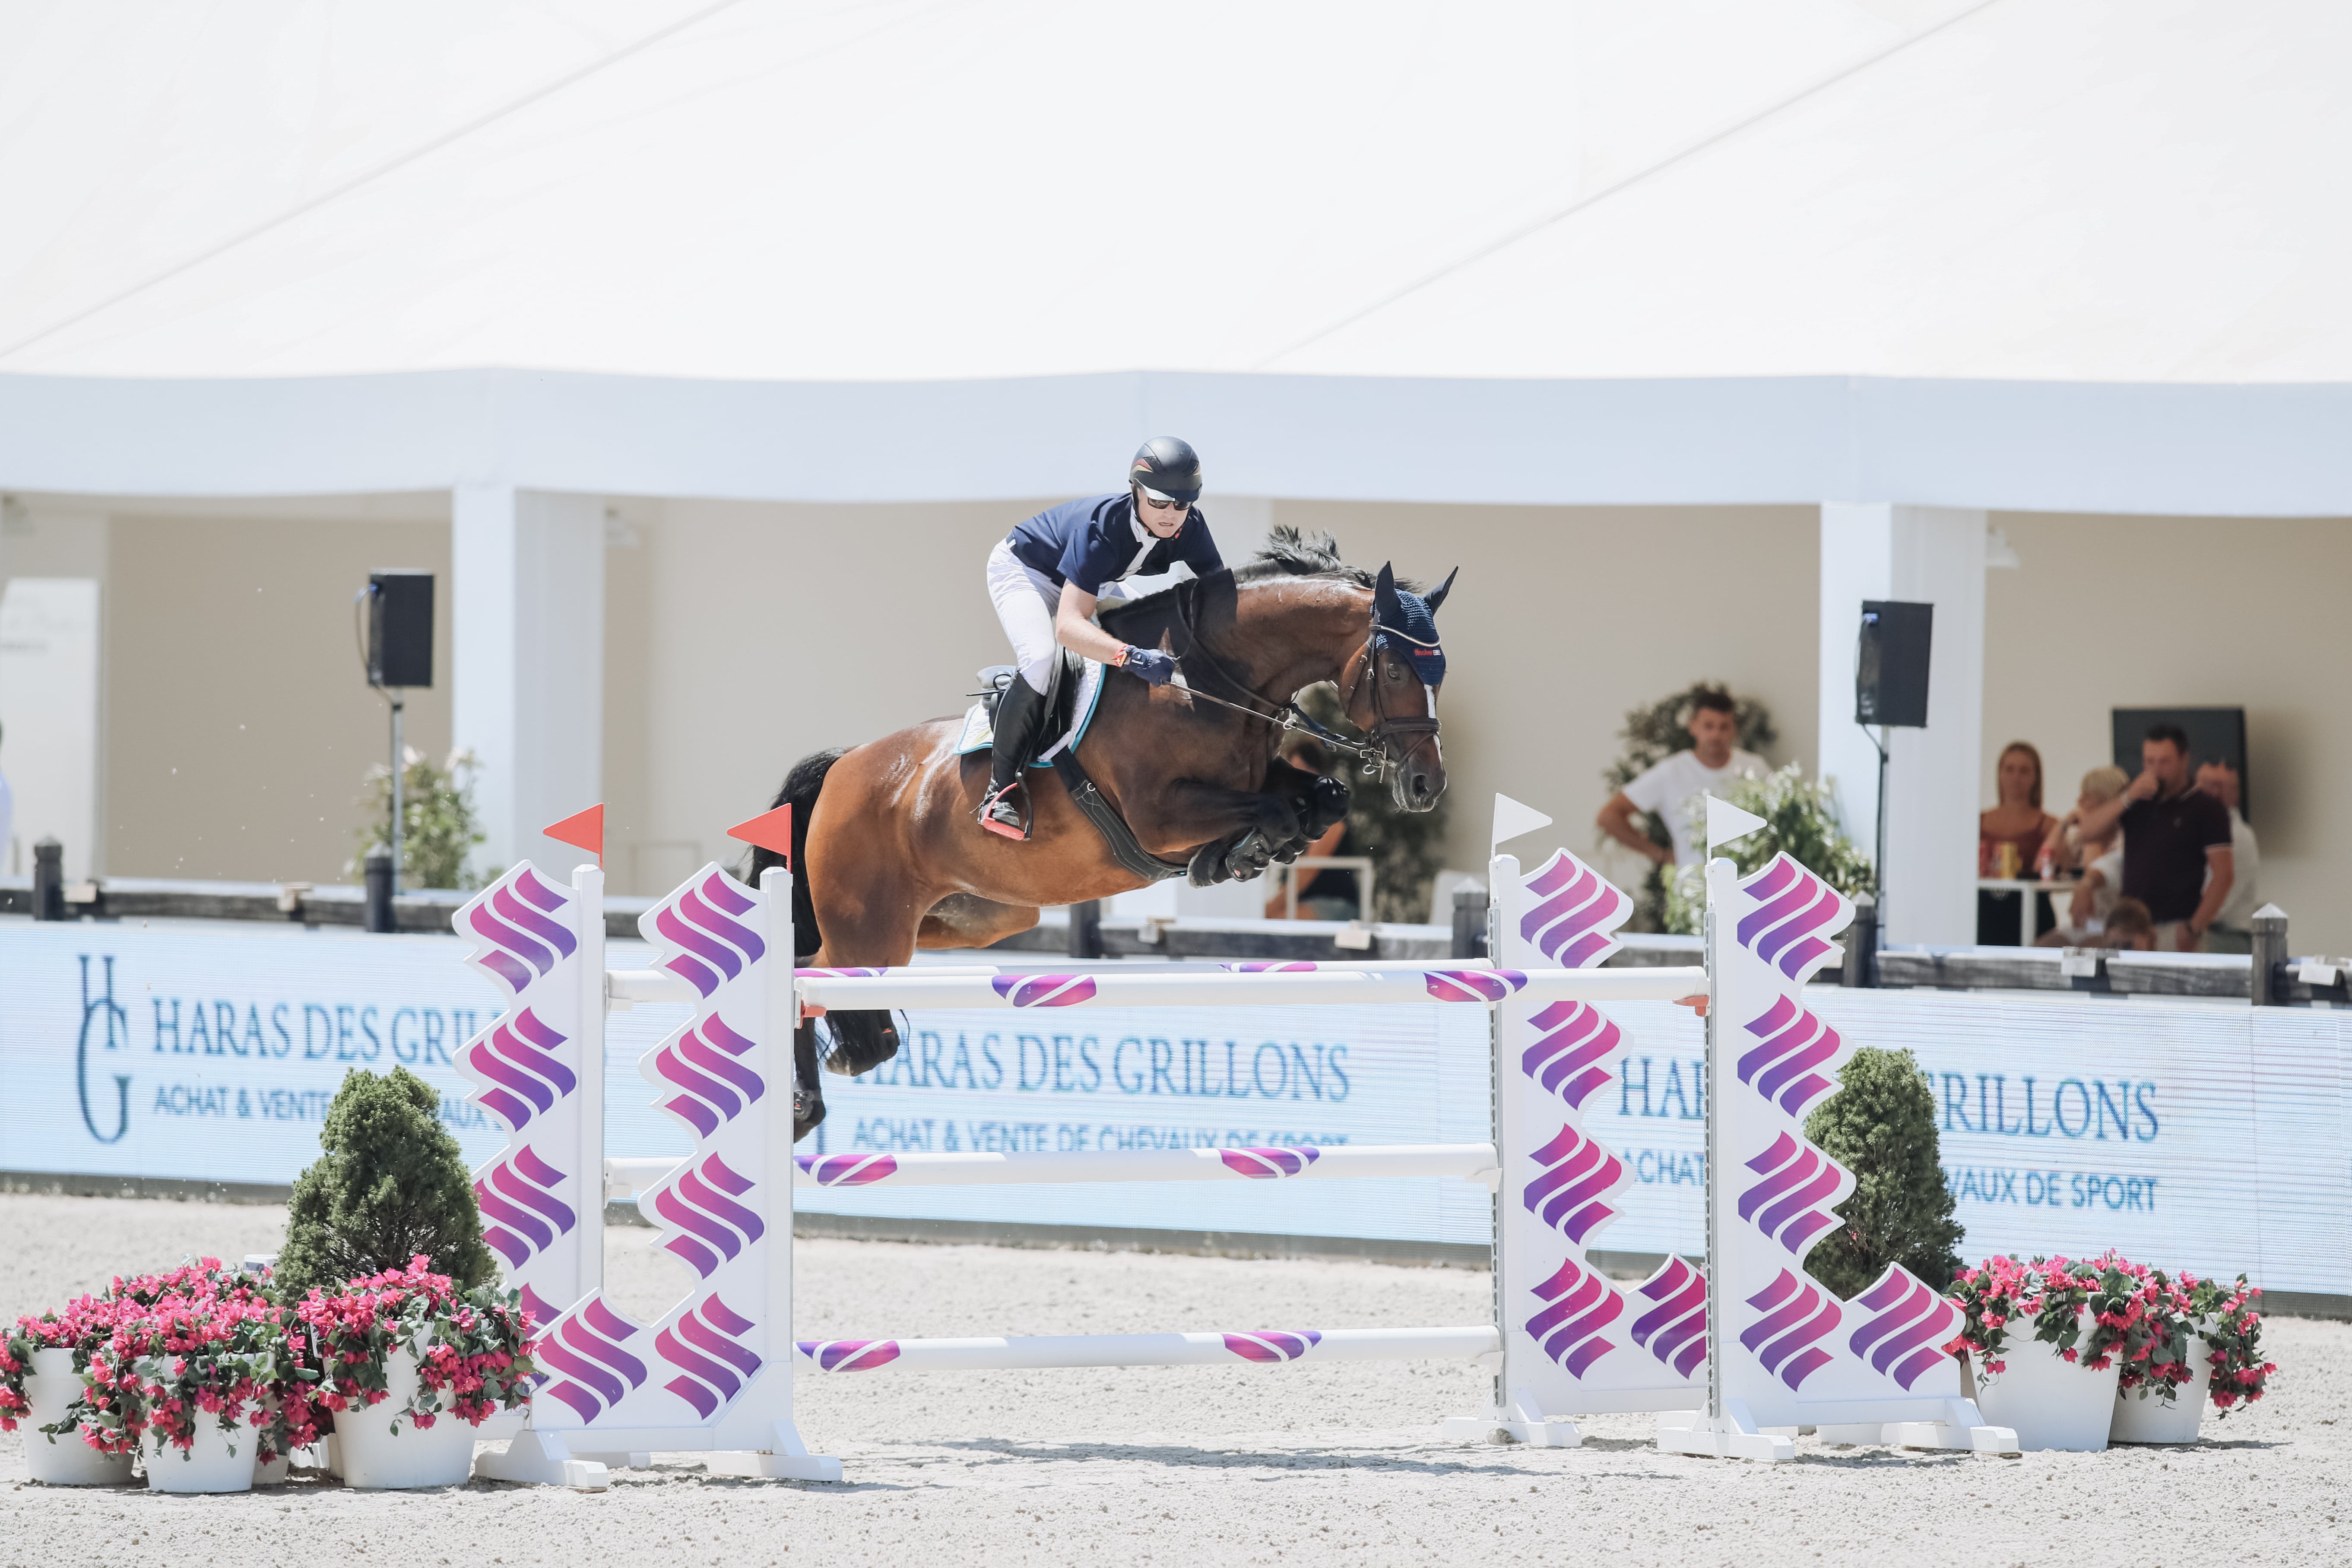 Michael Jung jumps to the victory in CSI2* Grand Prix in St-Tropez